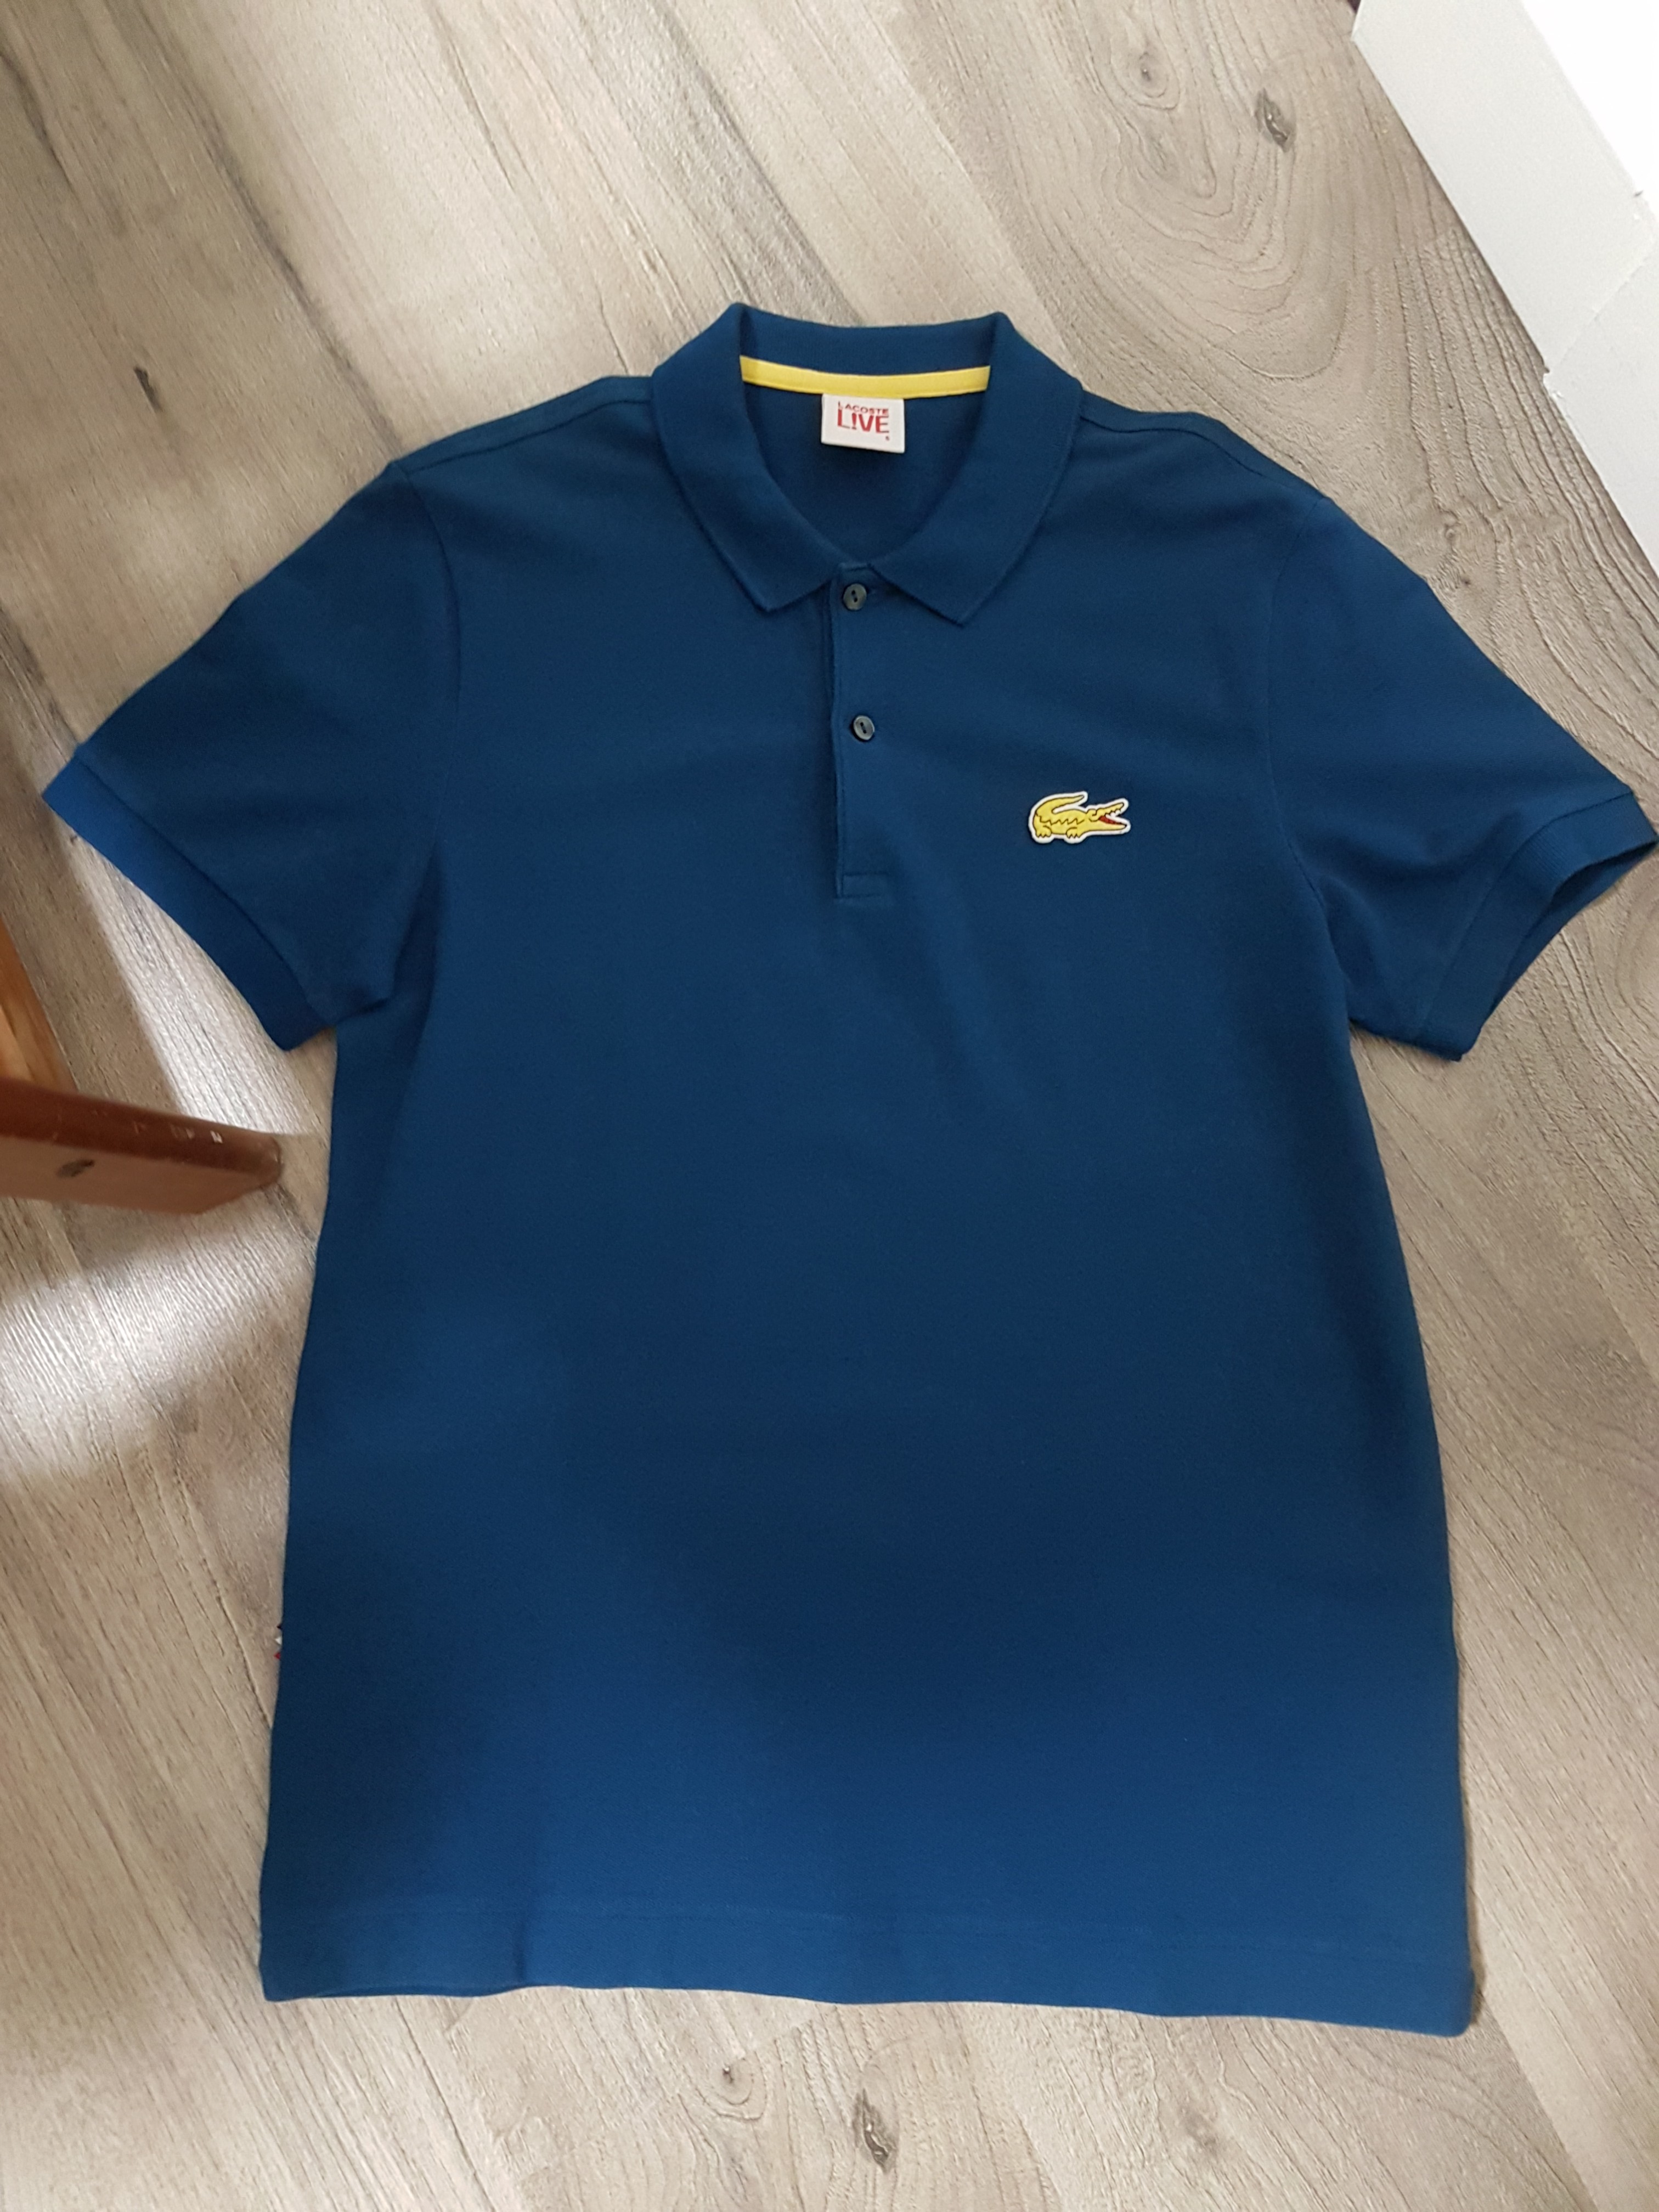 Lacoste Live Limited Edition Polo - Size 5, Men's Fashion, Tops 